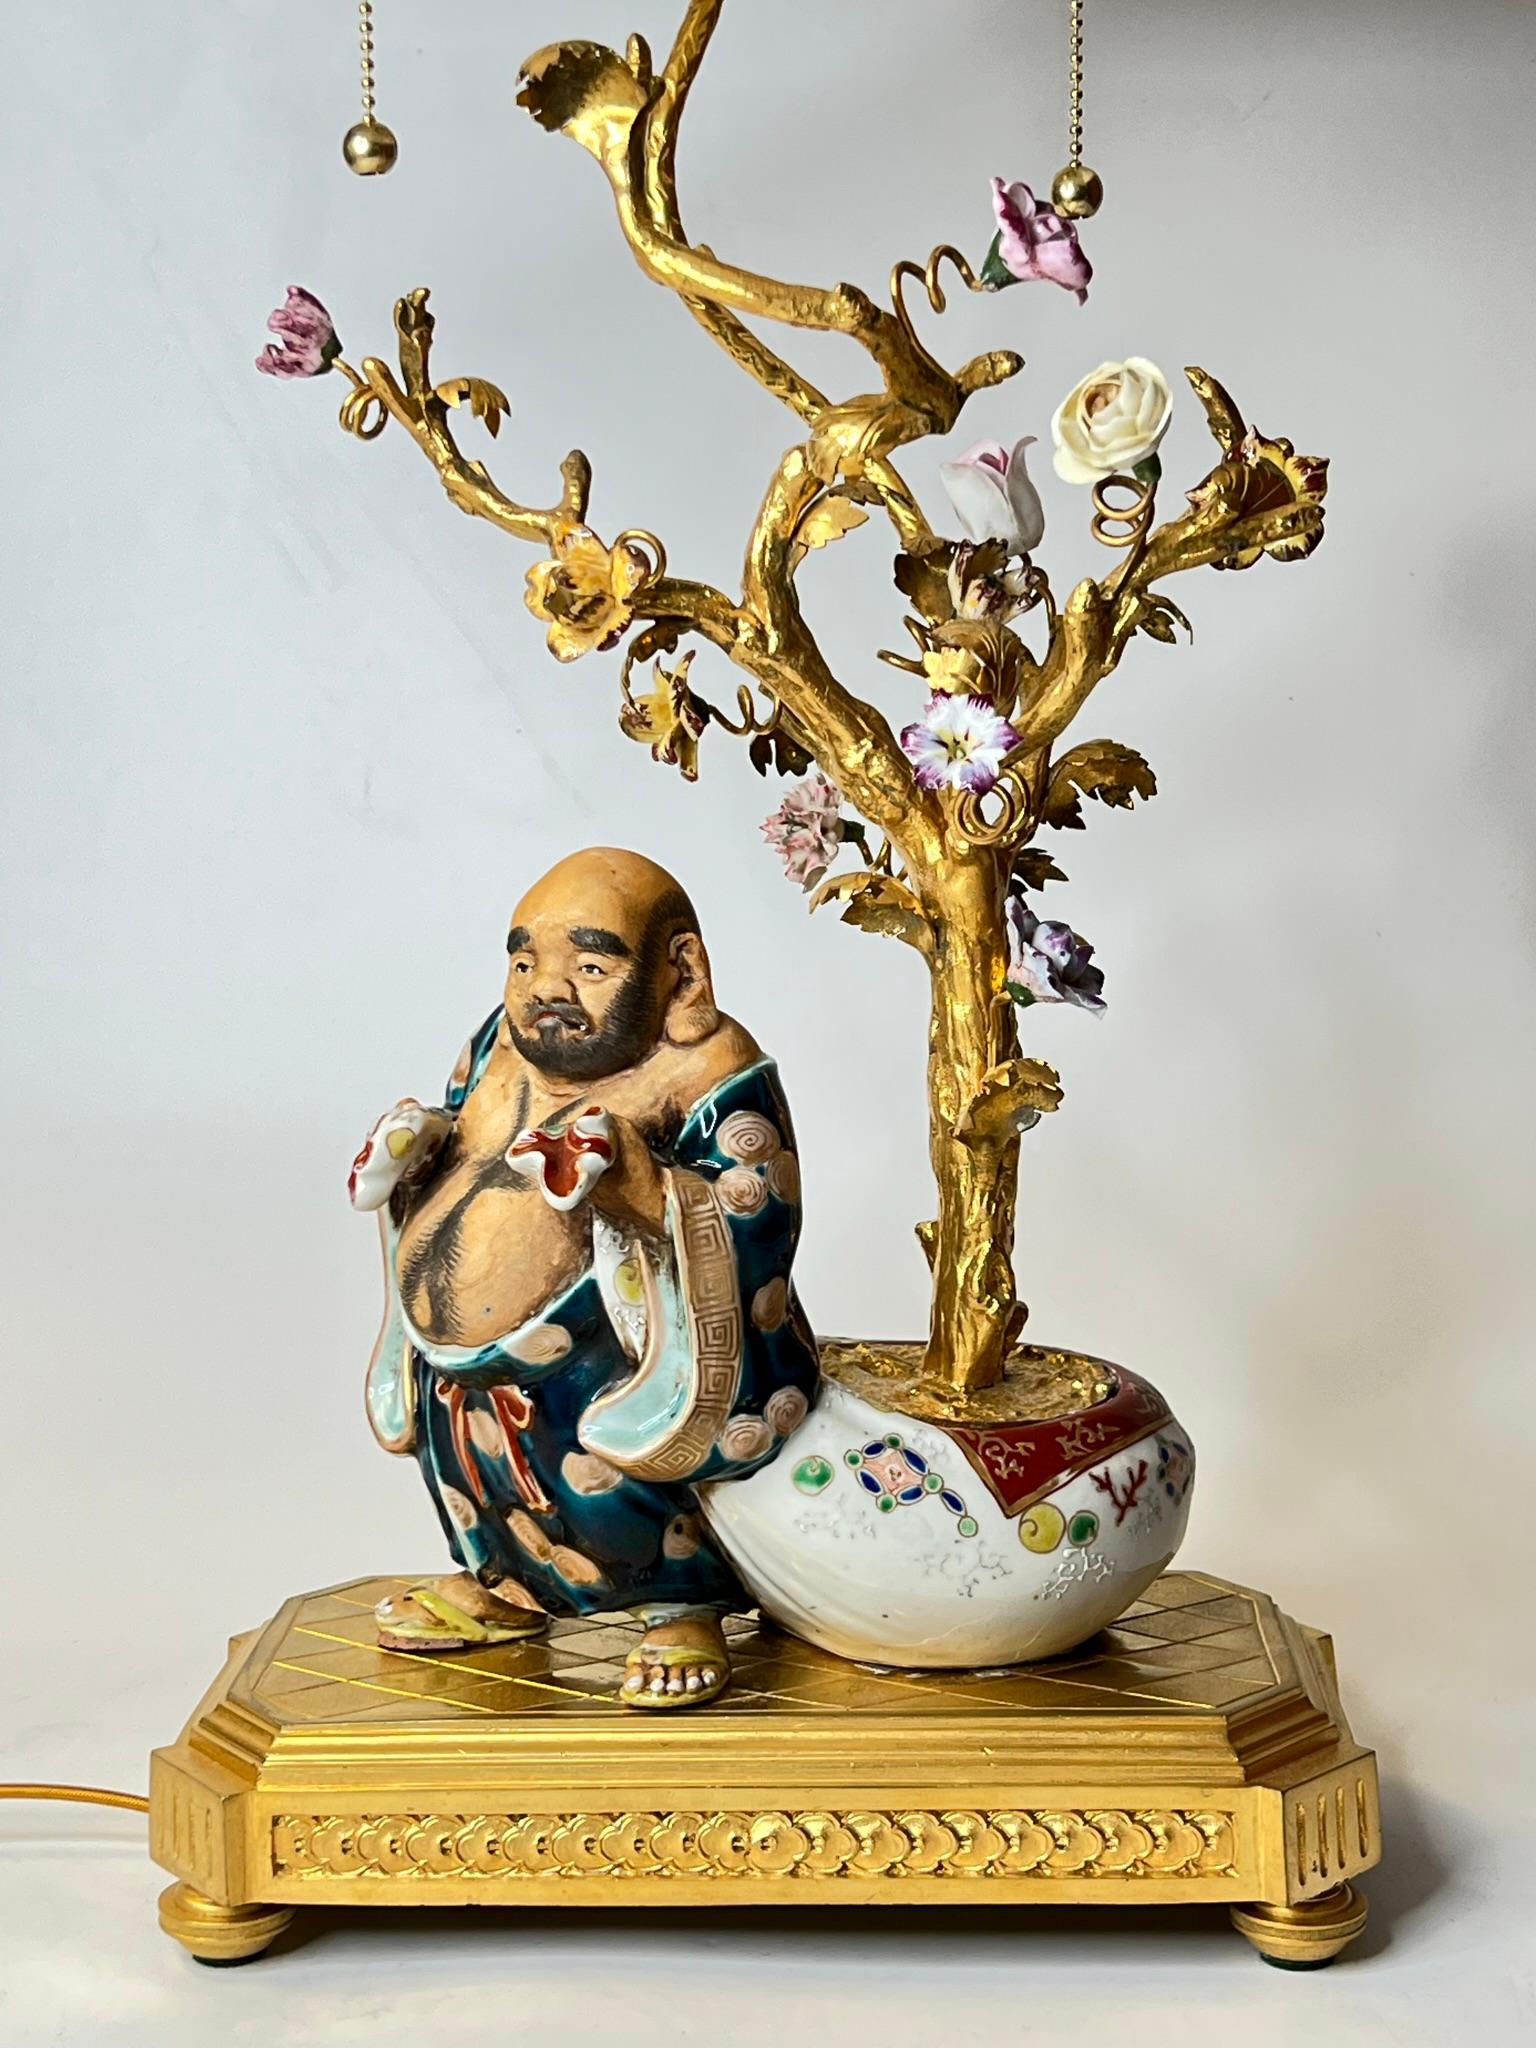 Chinese Export Chinoiserie Porcelain and Gilt Bronze Table Lamp Depicting Budai Laughing Buddha